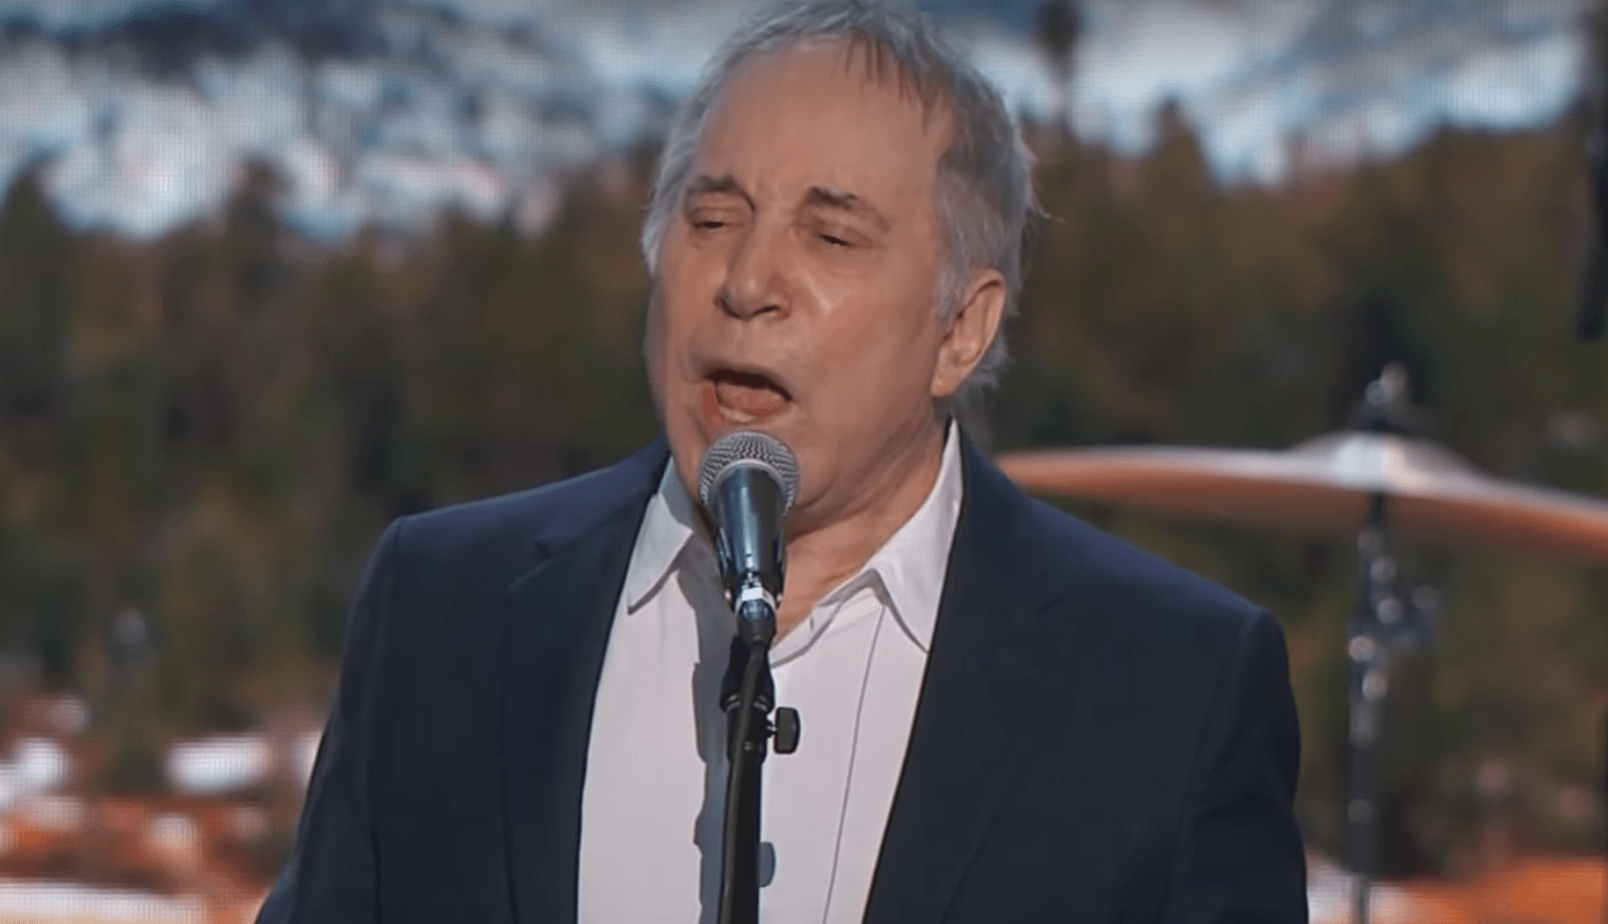 WATCH: Paul Simon sings ‘Bridge Over Troubled Water’ for divided Democrats